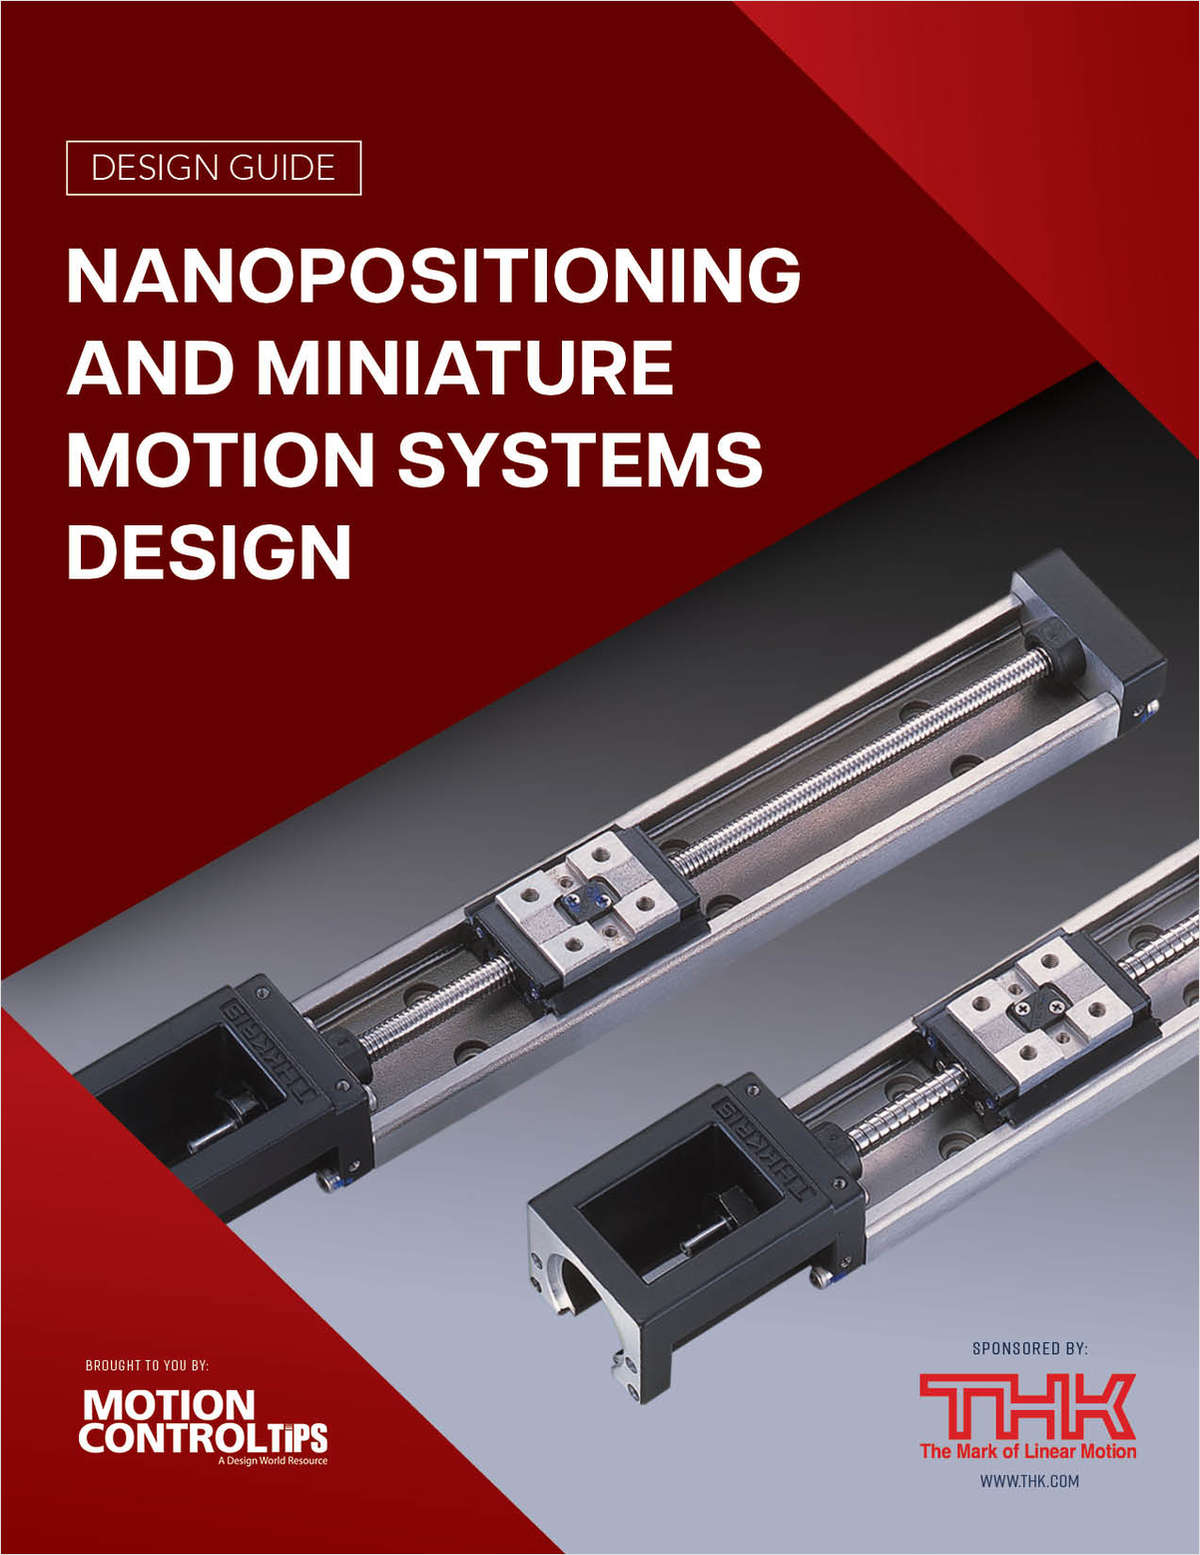 Design Guide: Nanopositioning and Miniature Motion Systems Design